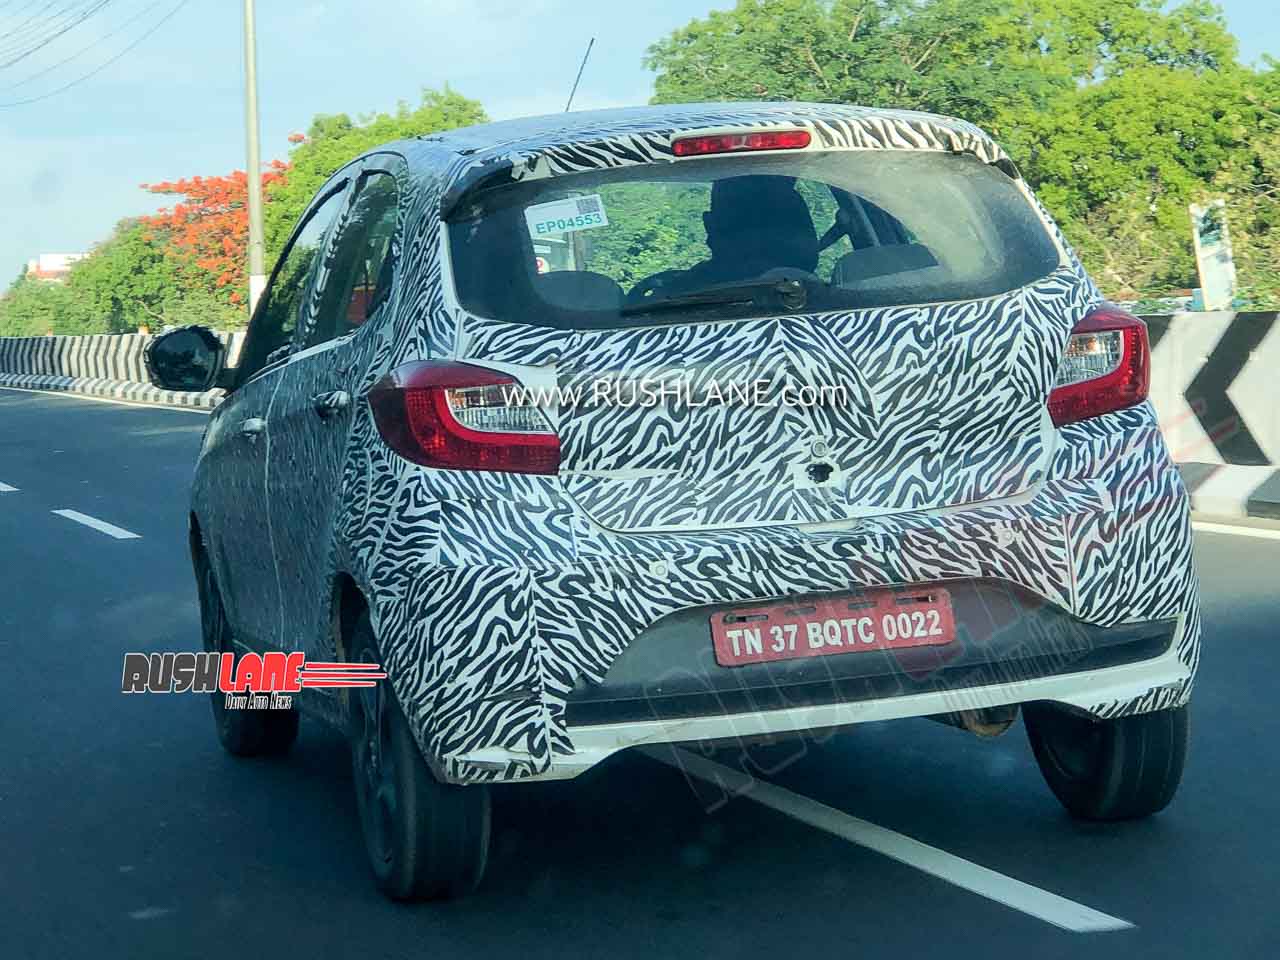 No styling differences from the existing petrol Tiago